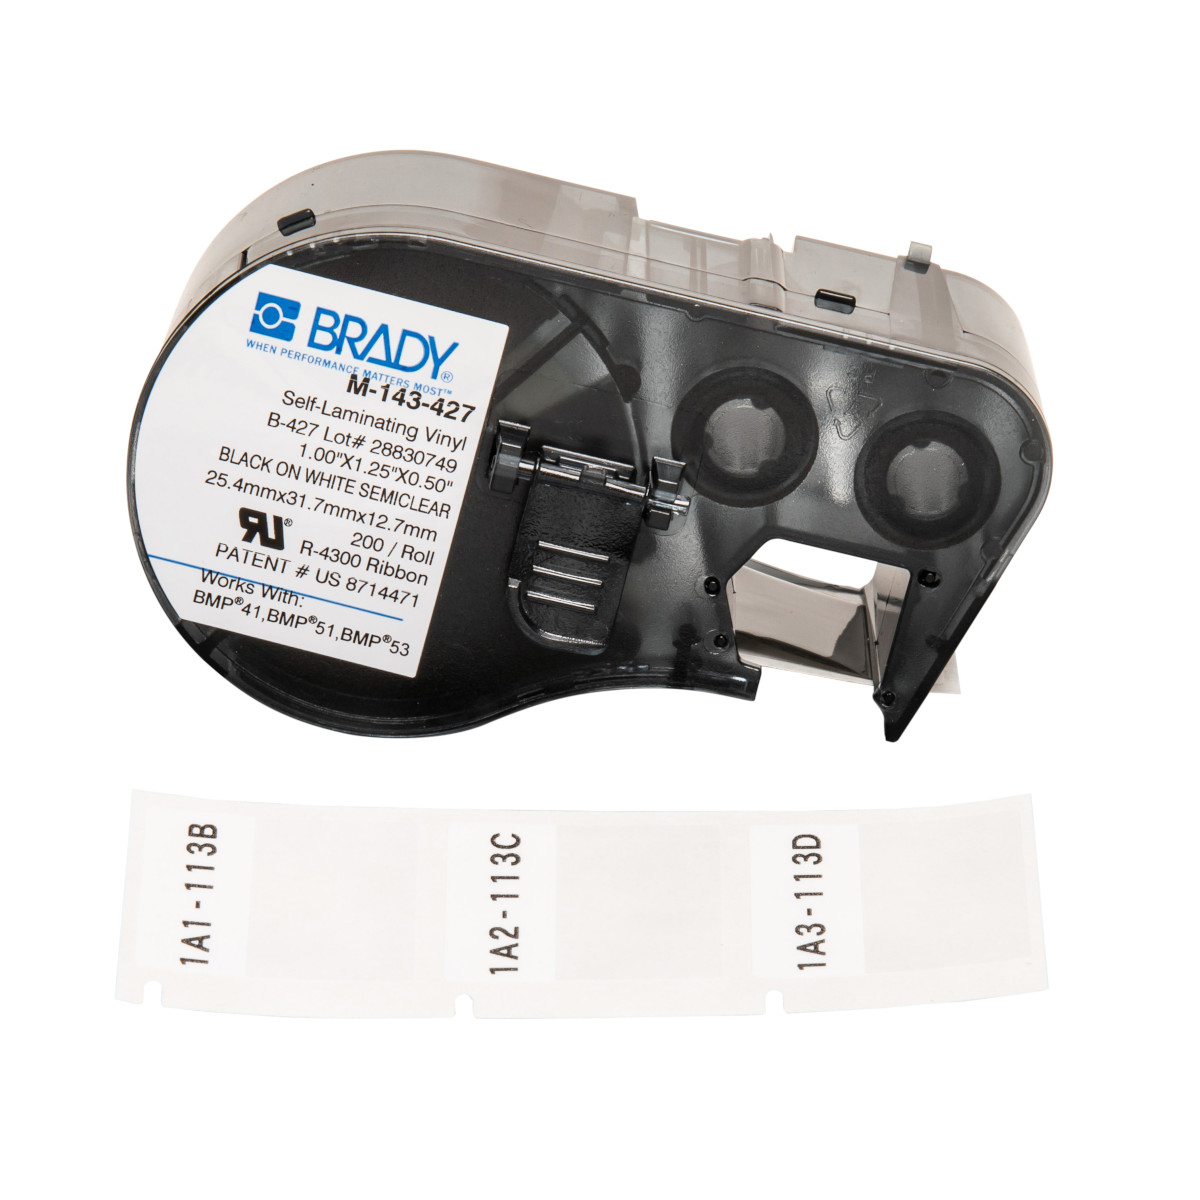 - Black on White Brady Self-Laminating Vinyl Label Tape and BMP53 Label Makers BMP51 Compatible with BMP41 1.25 Height 1 Width M-143-427 Translucent Tape